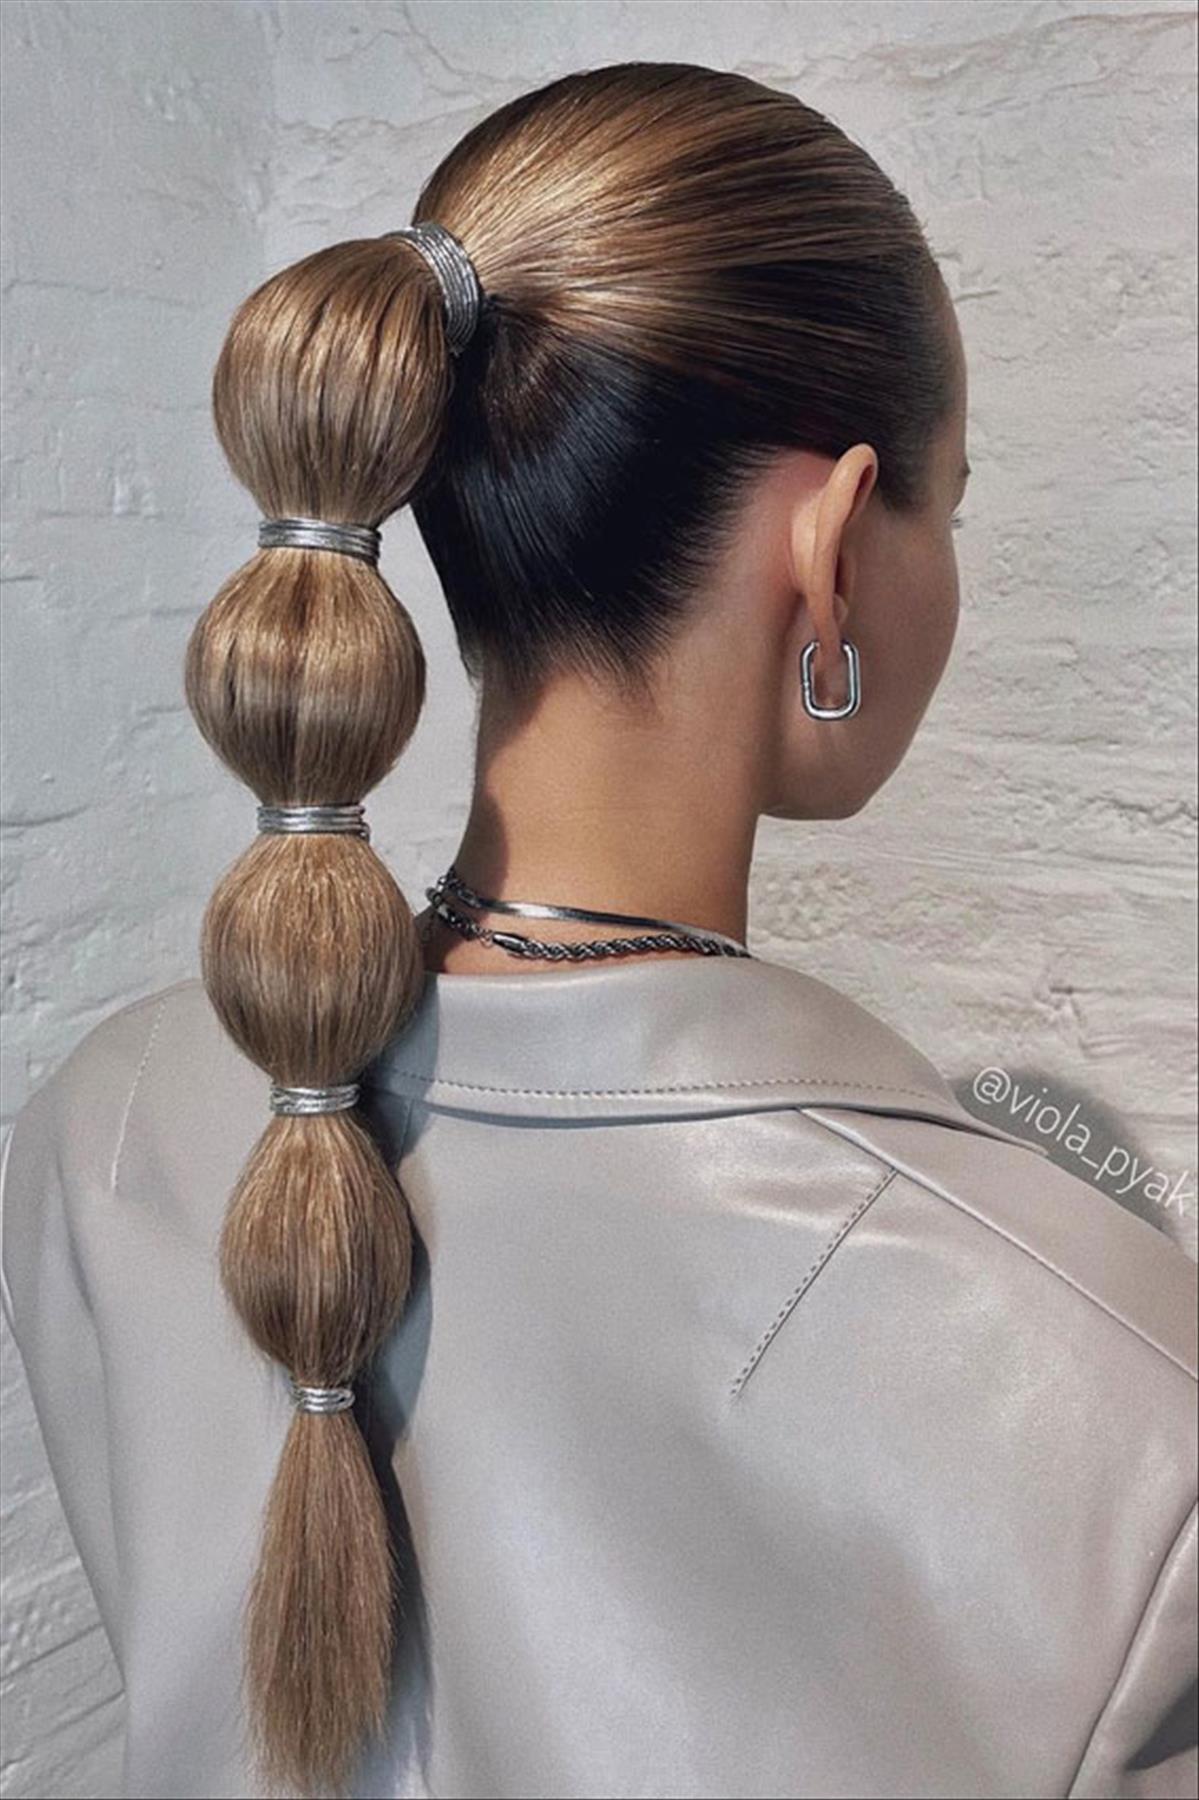 Chic Ways to Wear Bubble Braid Hairstyles Trending Now